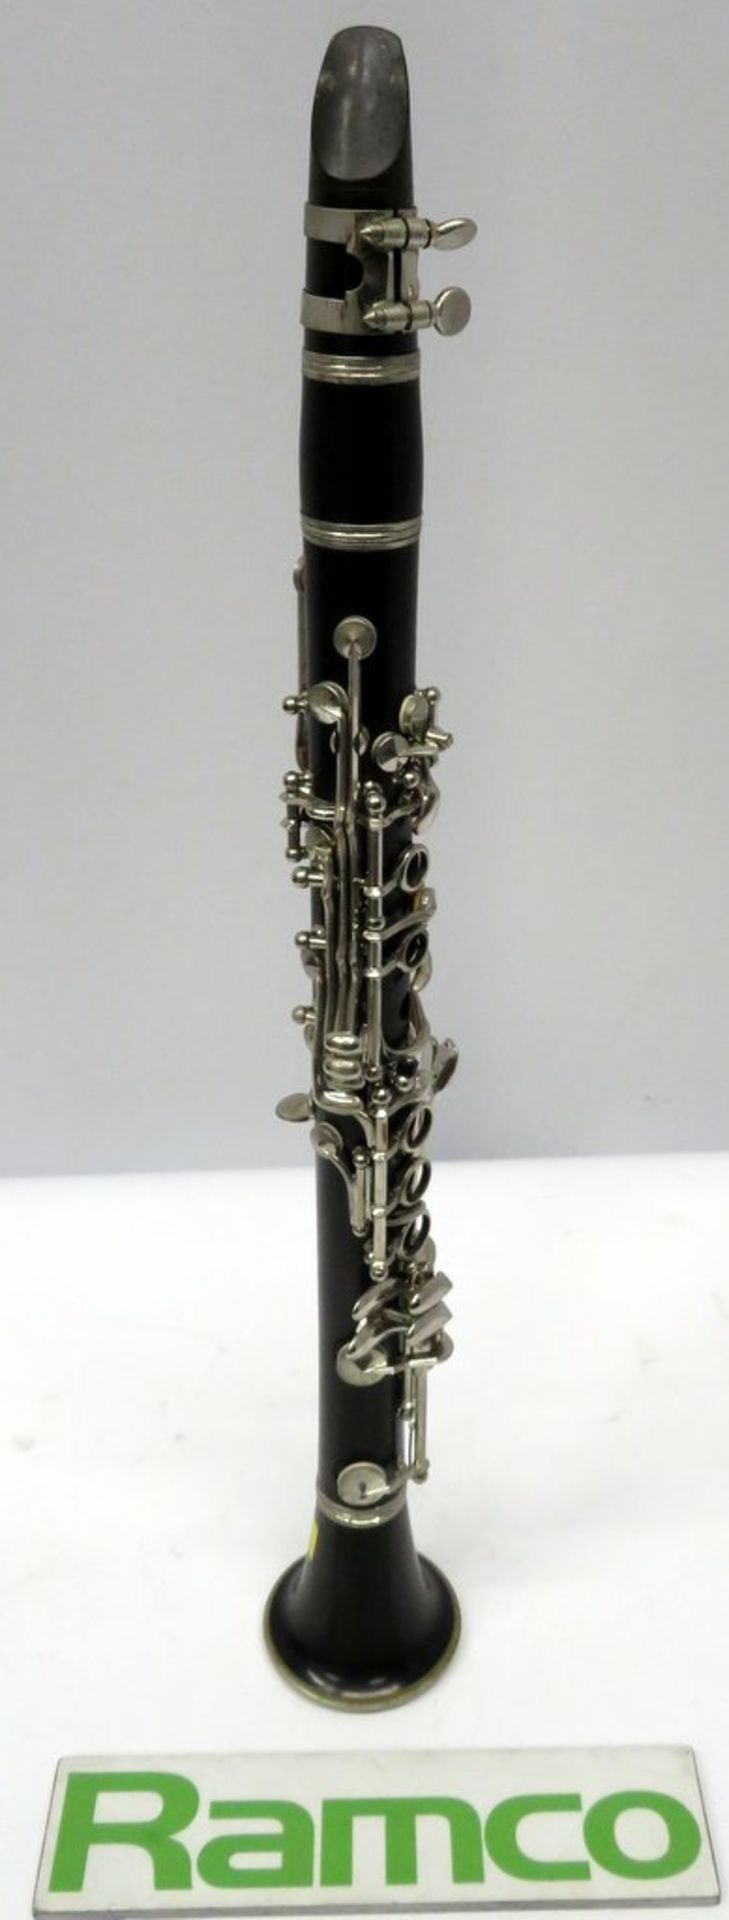 Buffet Crampon E Flat Clarinet Complete With Case. - Image 10 of 17